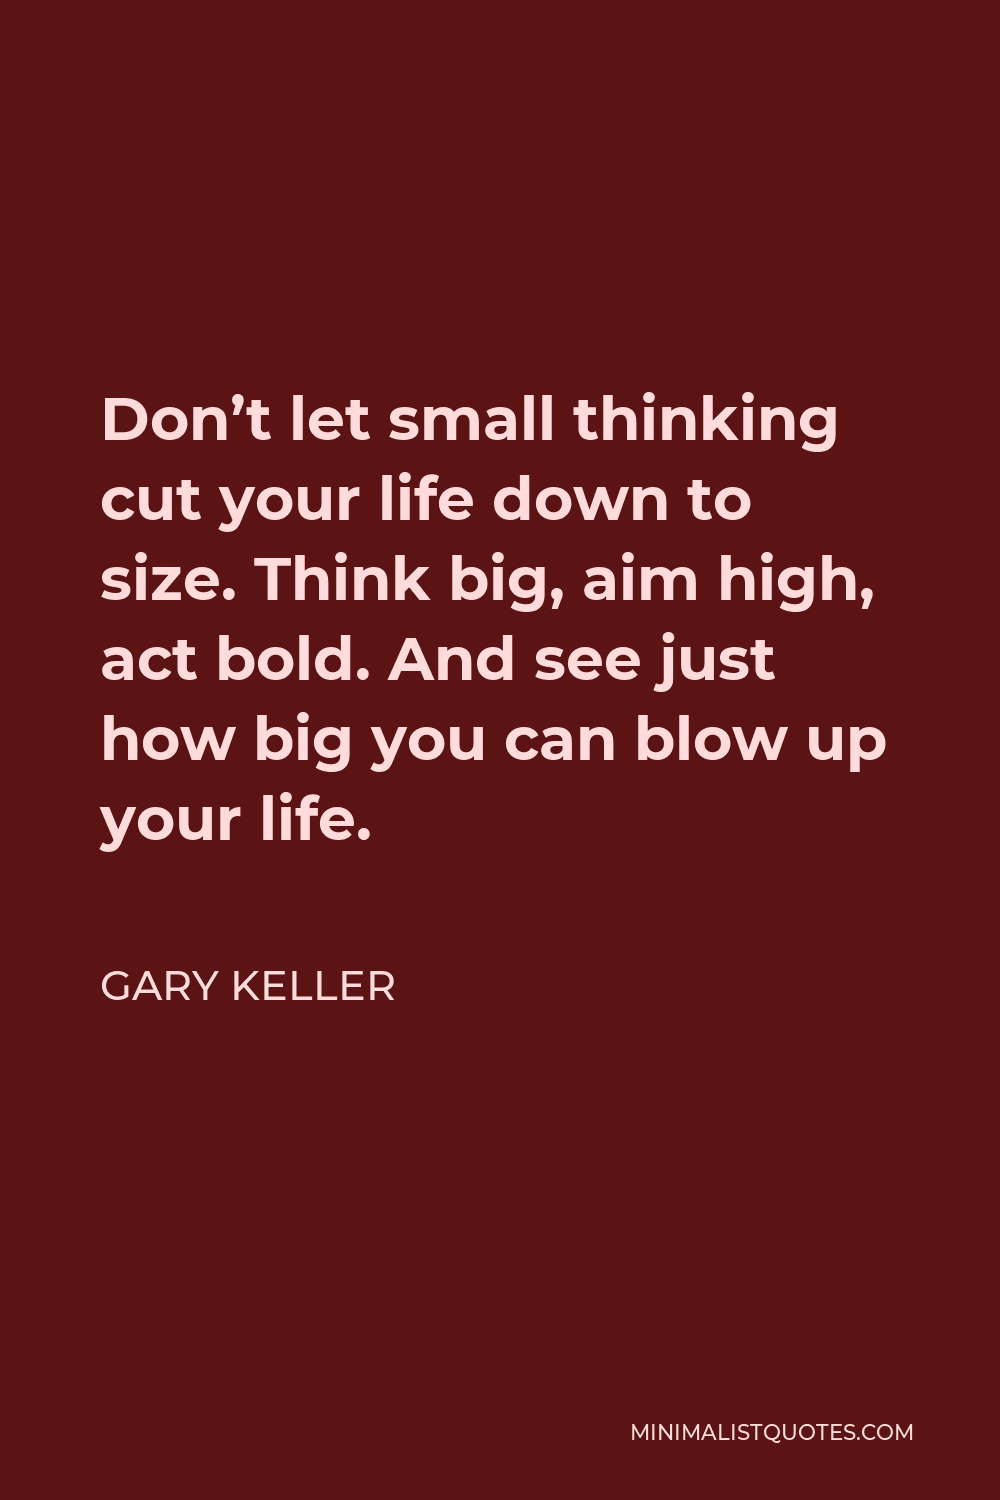 Gary Keller Quote - Don’t let small thinking cut your life down to size. Think big, aim high, act bold. And see just how big you can blow up your life.